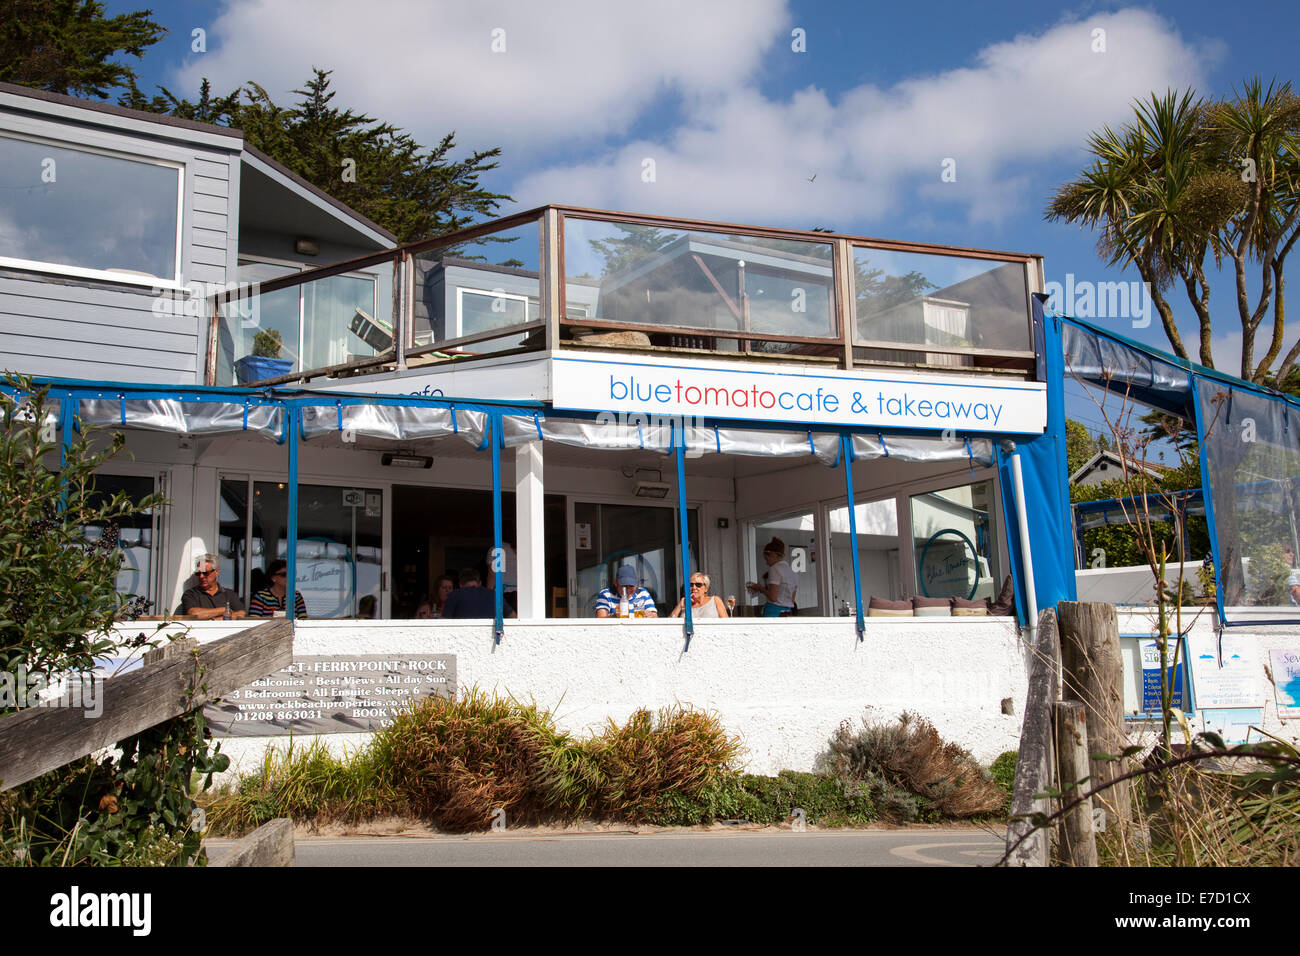 The Blue Tomato Café overlooking the beach in Rock, Cornwall, England, U.K. Stock Photo